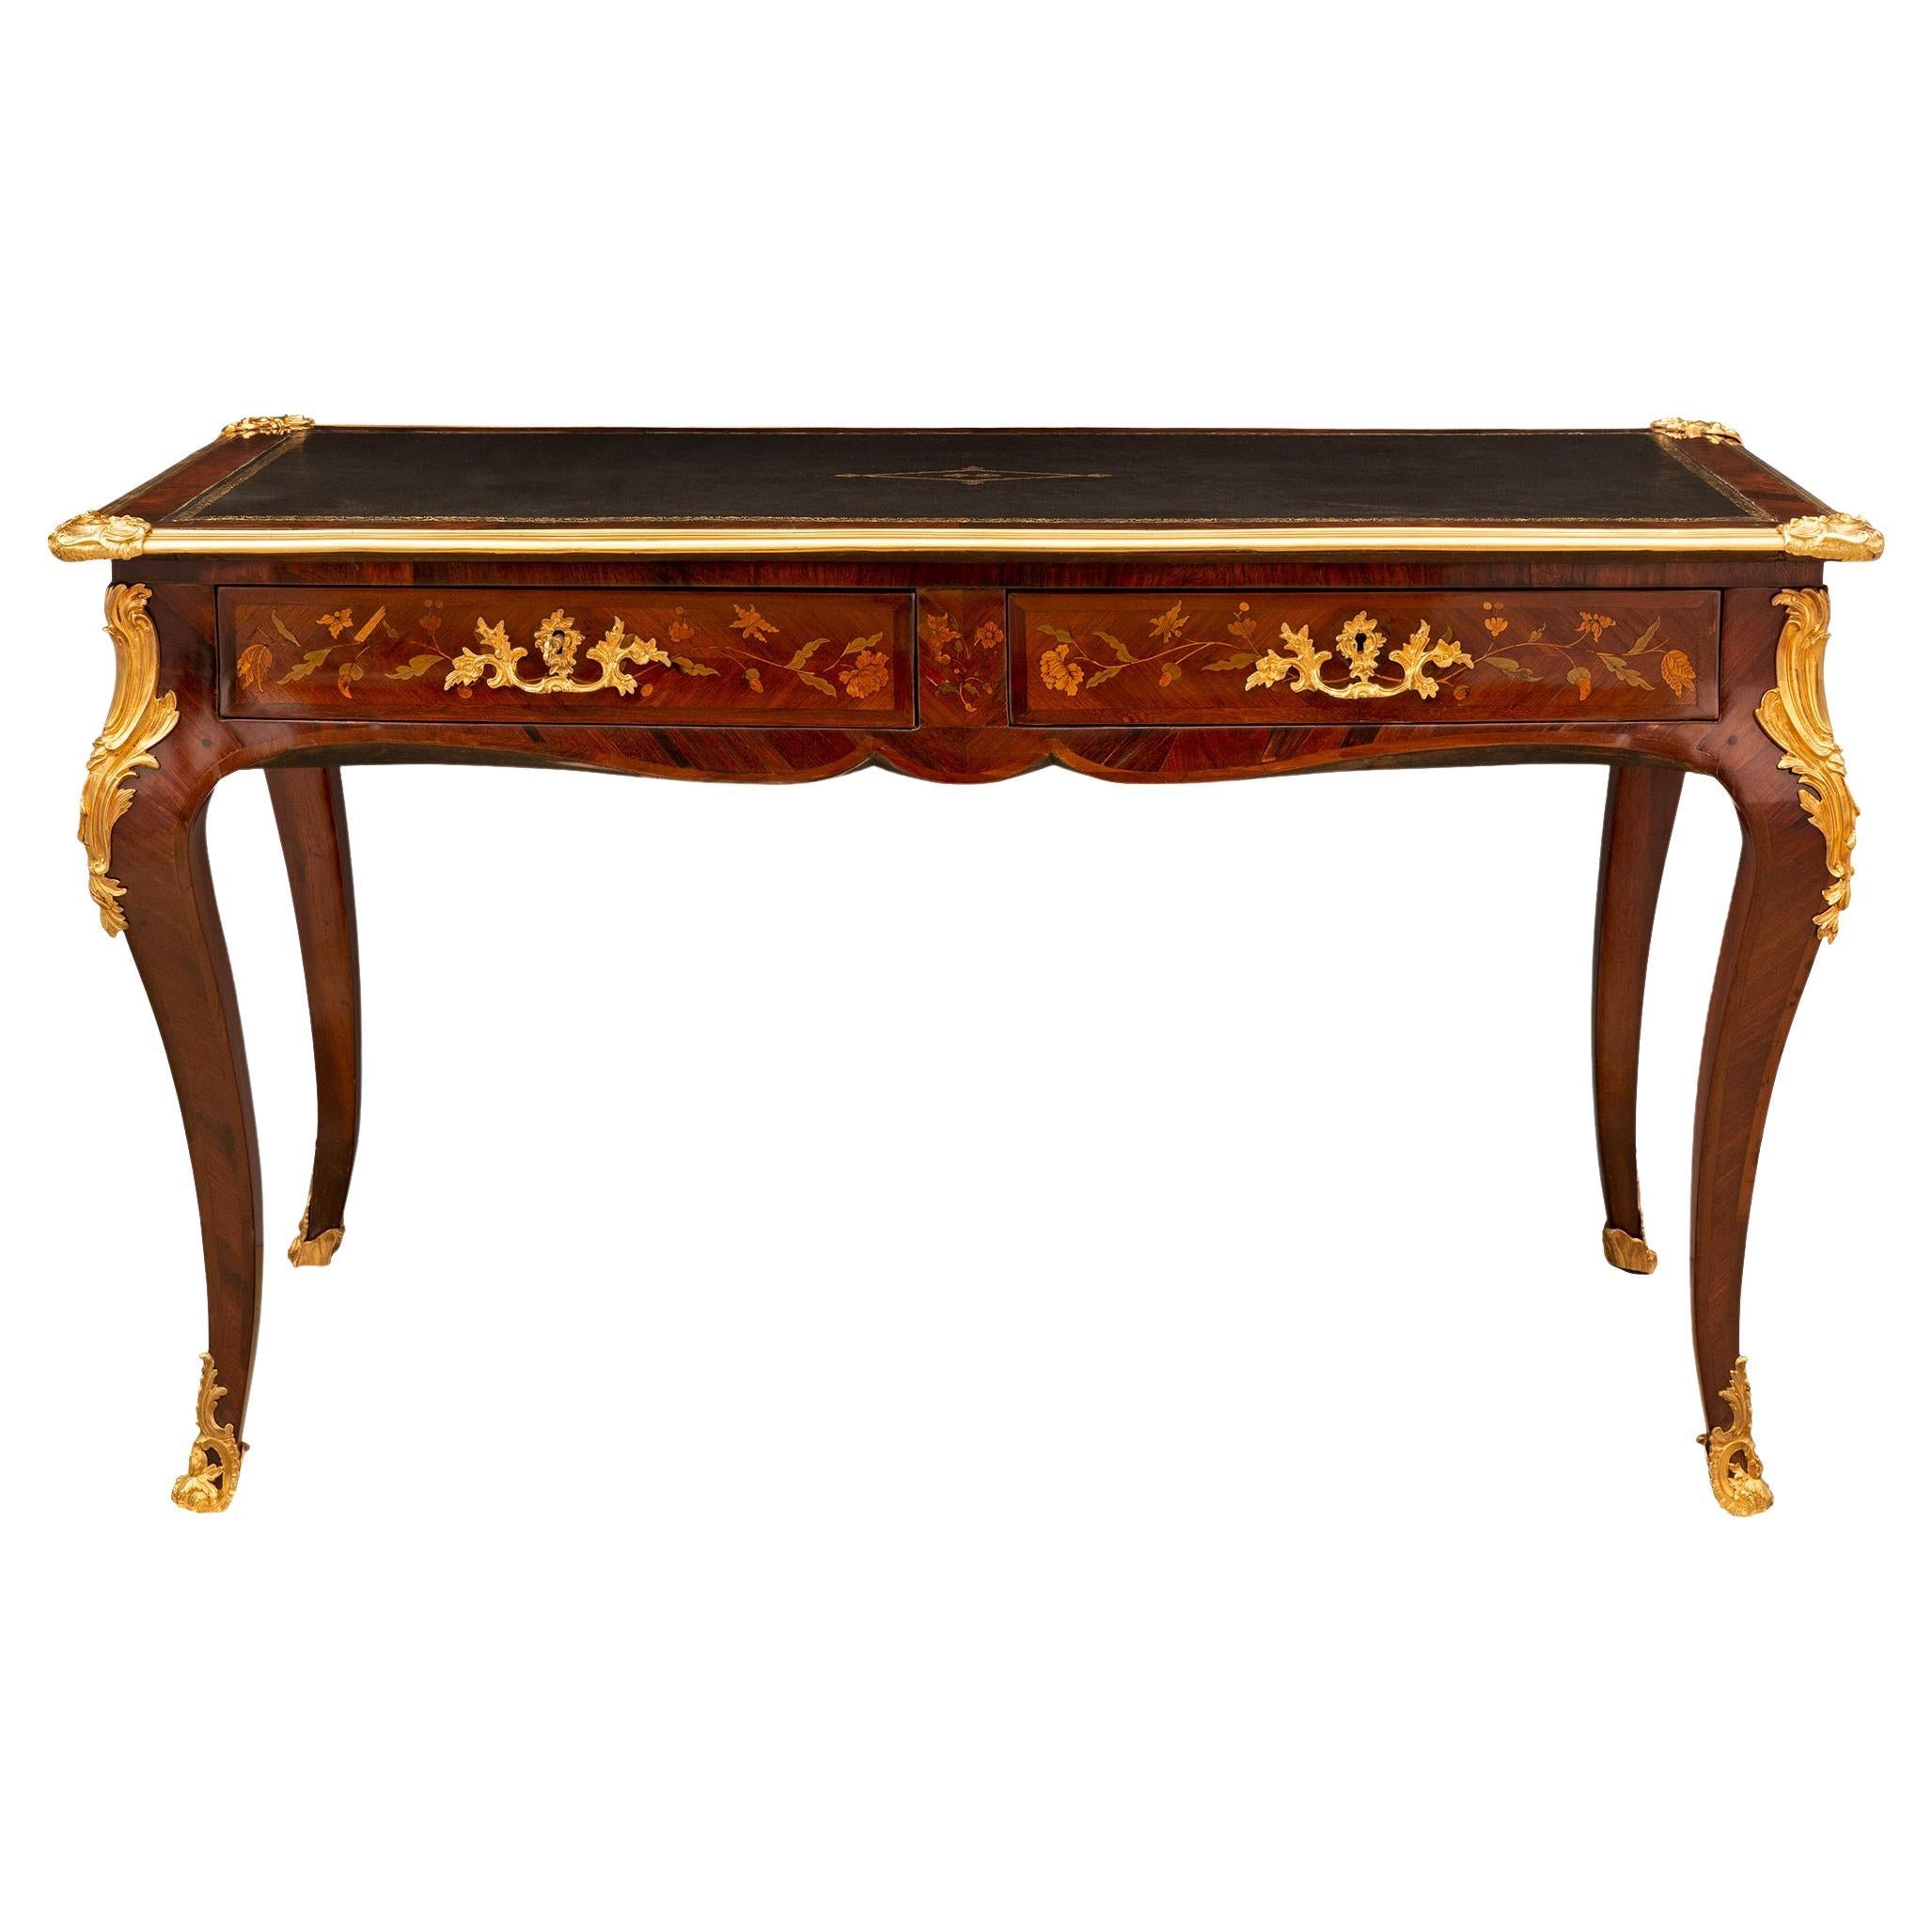 French, Early 19th Century, Louis XV Style Bureau Plat For Sale